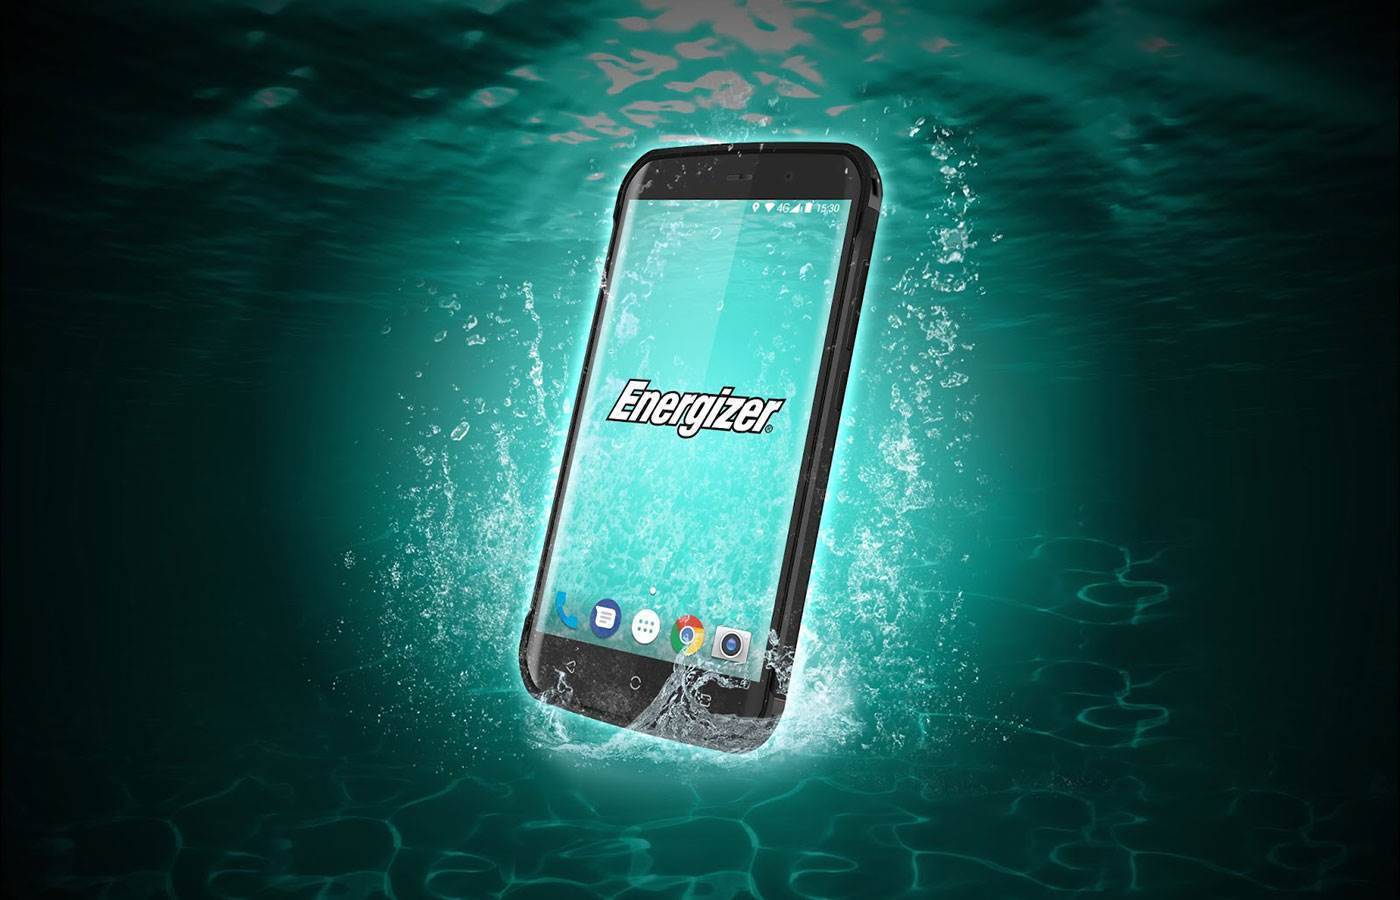 Energizer Claims 16 Day Battery Life With Smartphone Launch Mobility Crn Australia